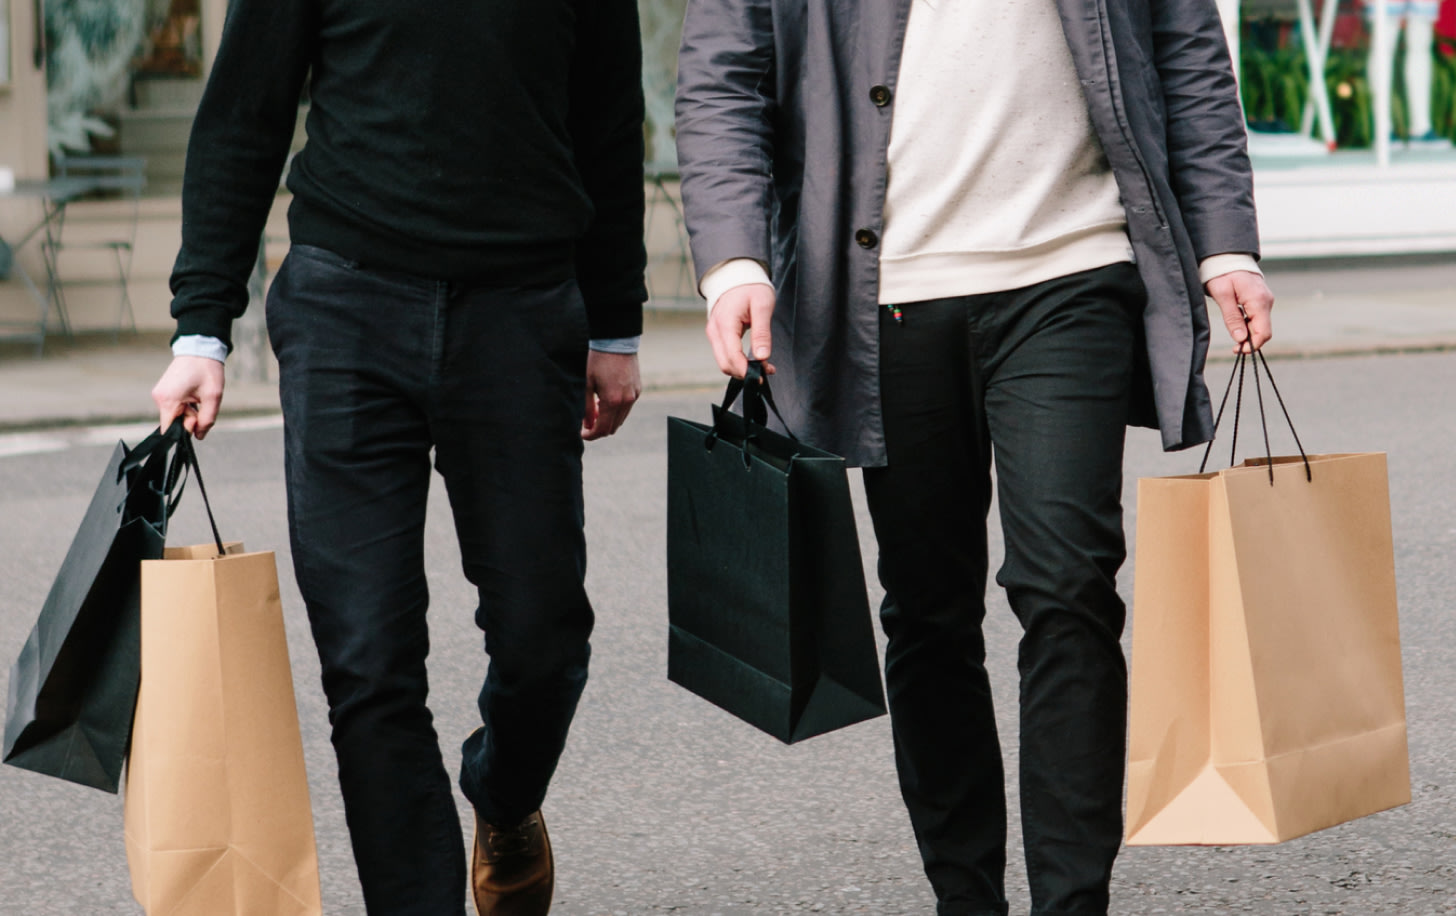 two people with shopping bags